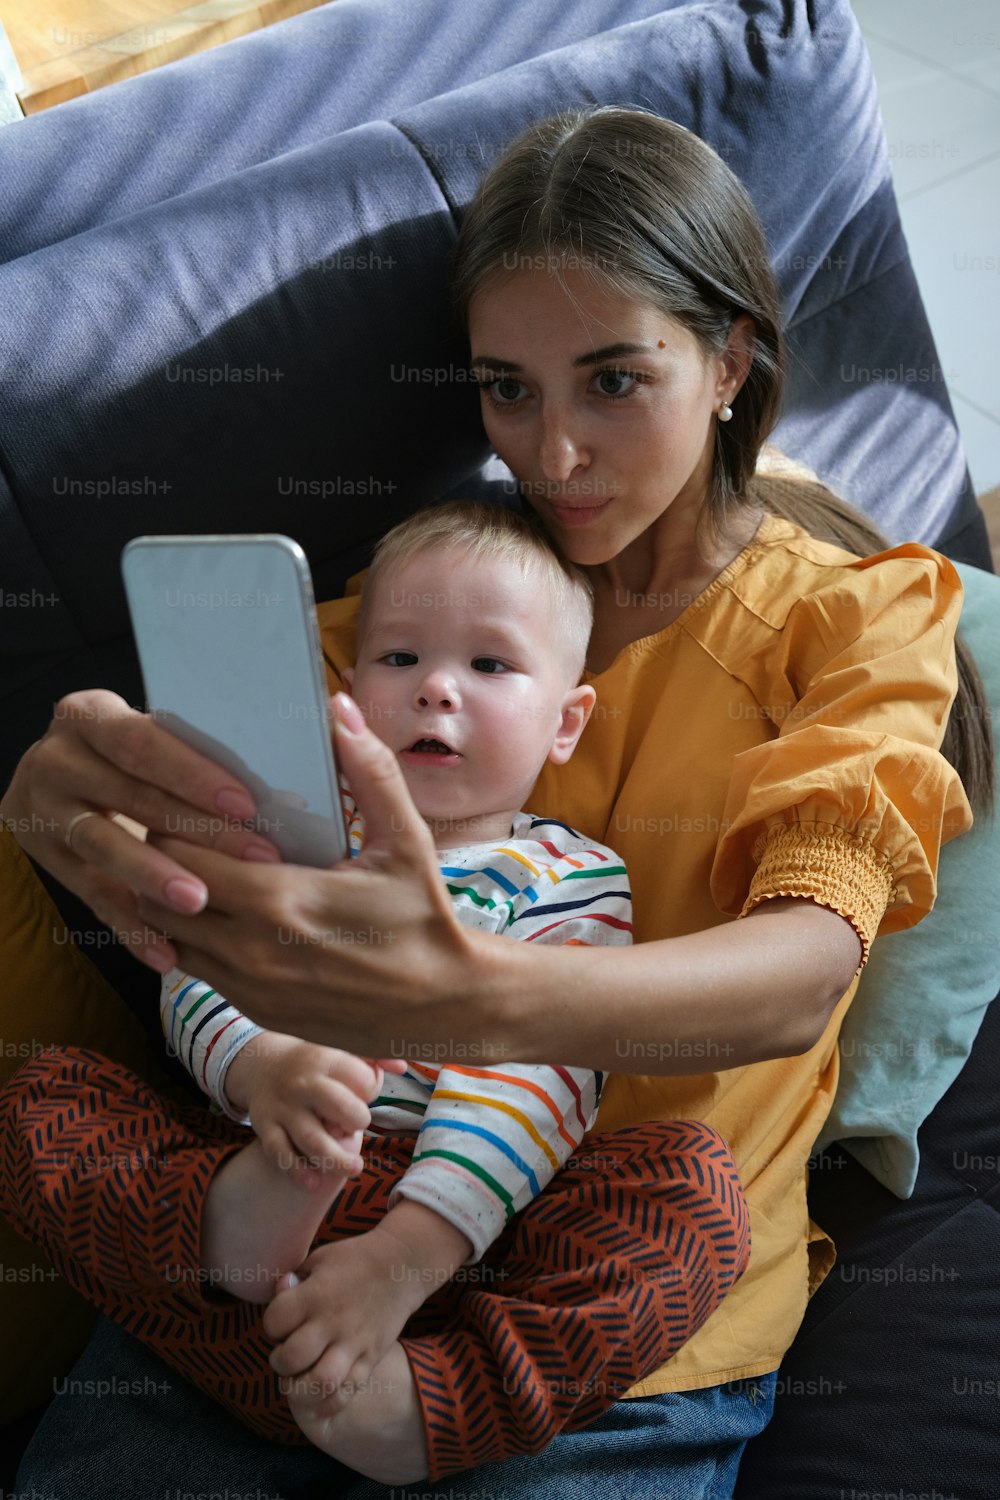 a woman holding a baby and looking at a cell phone